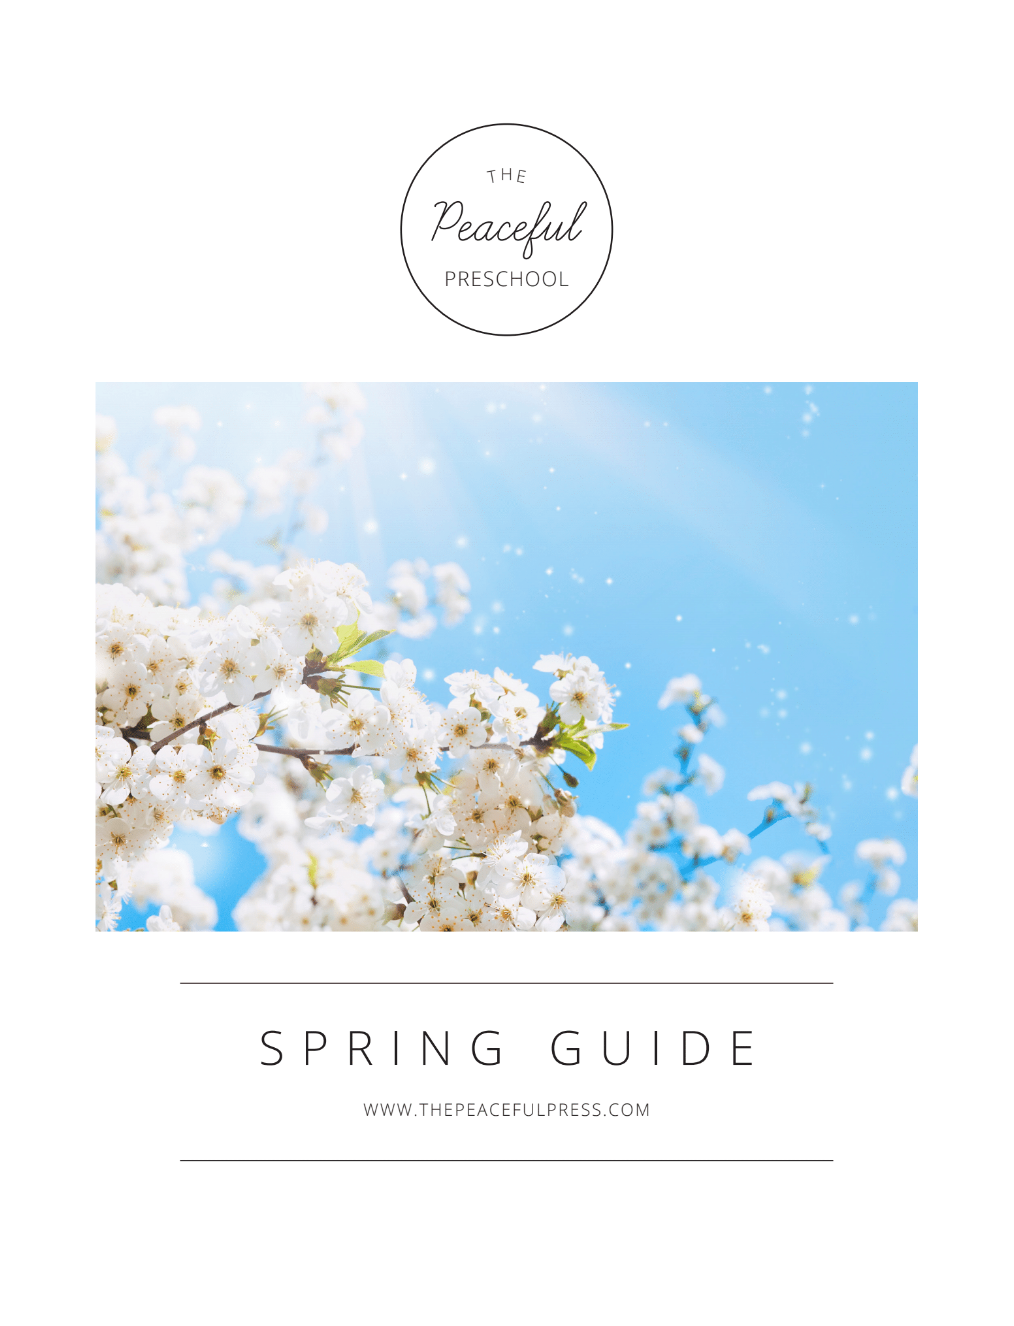 The Cover Art of the 4 week homeschool Spring Guide, with flowers on a blue background.